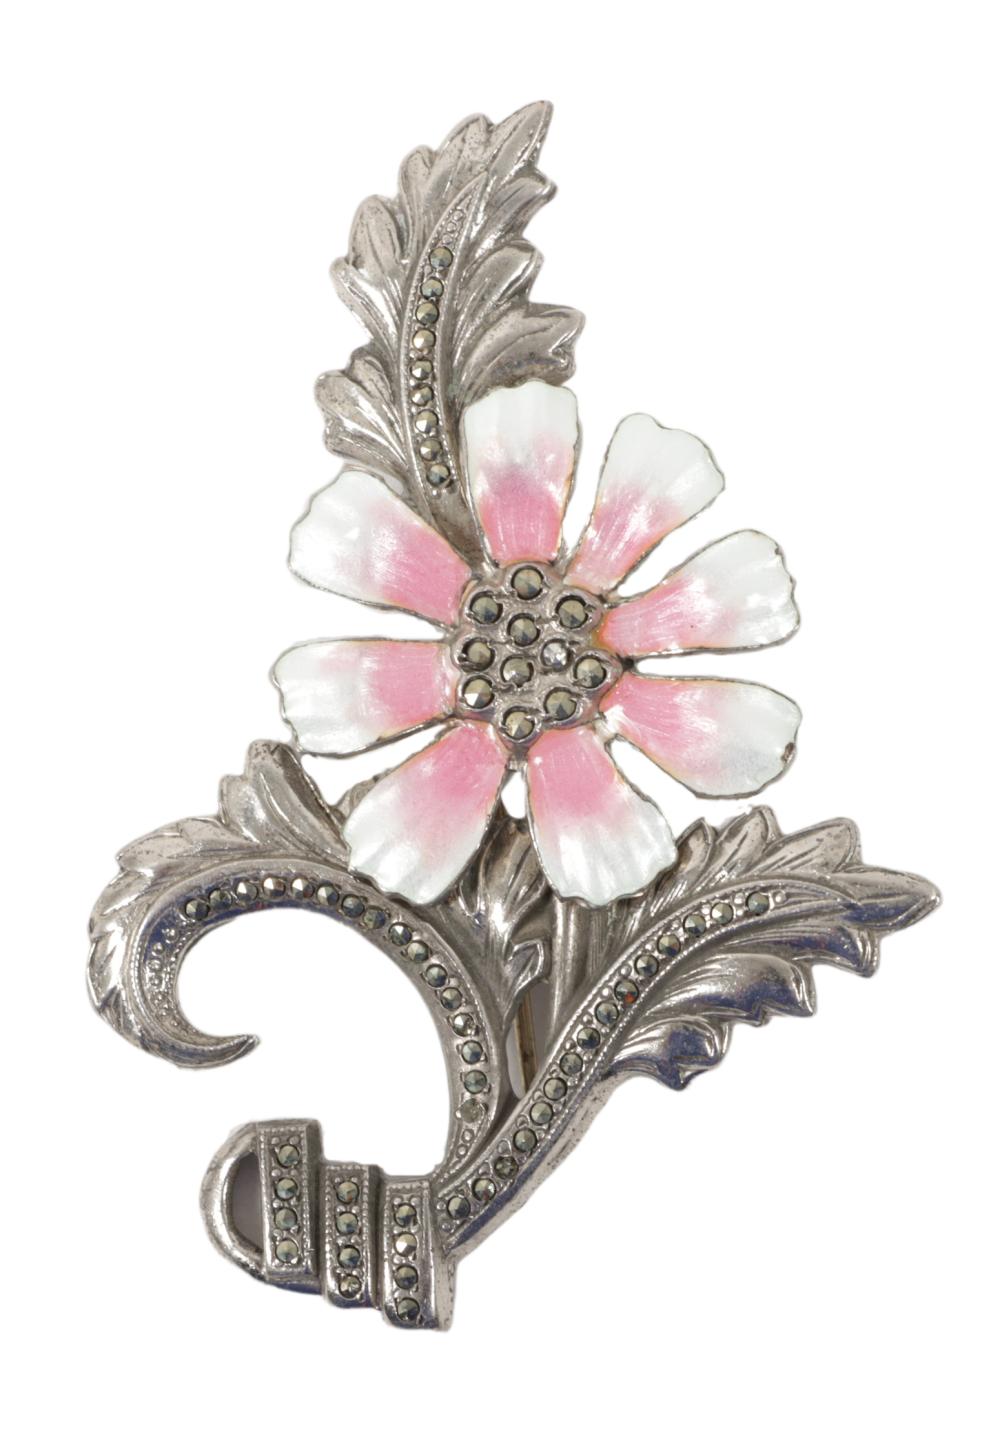 STERLING SILVER RETRO FLOWER PIN 30a5c9